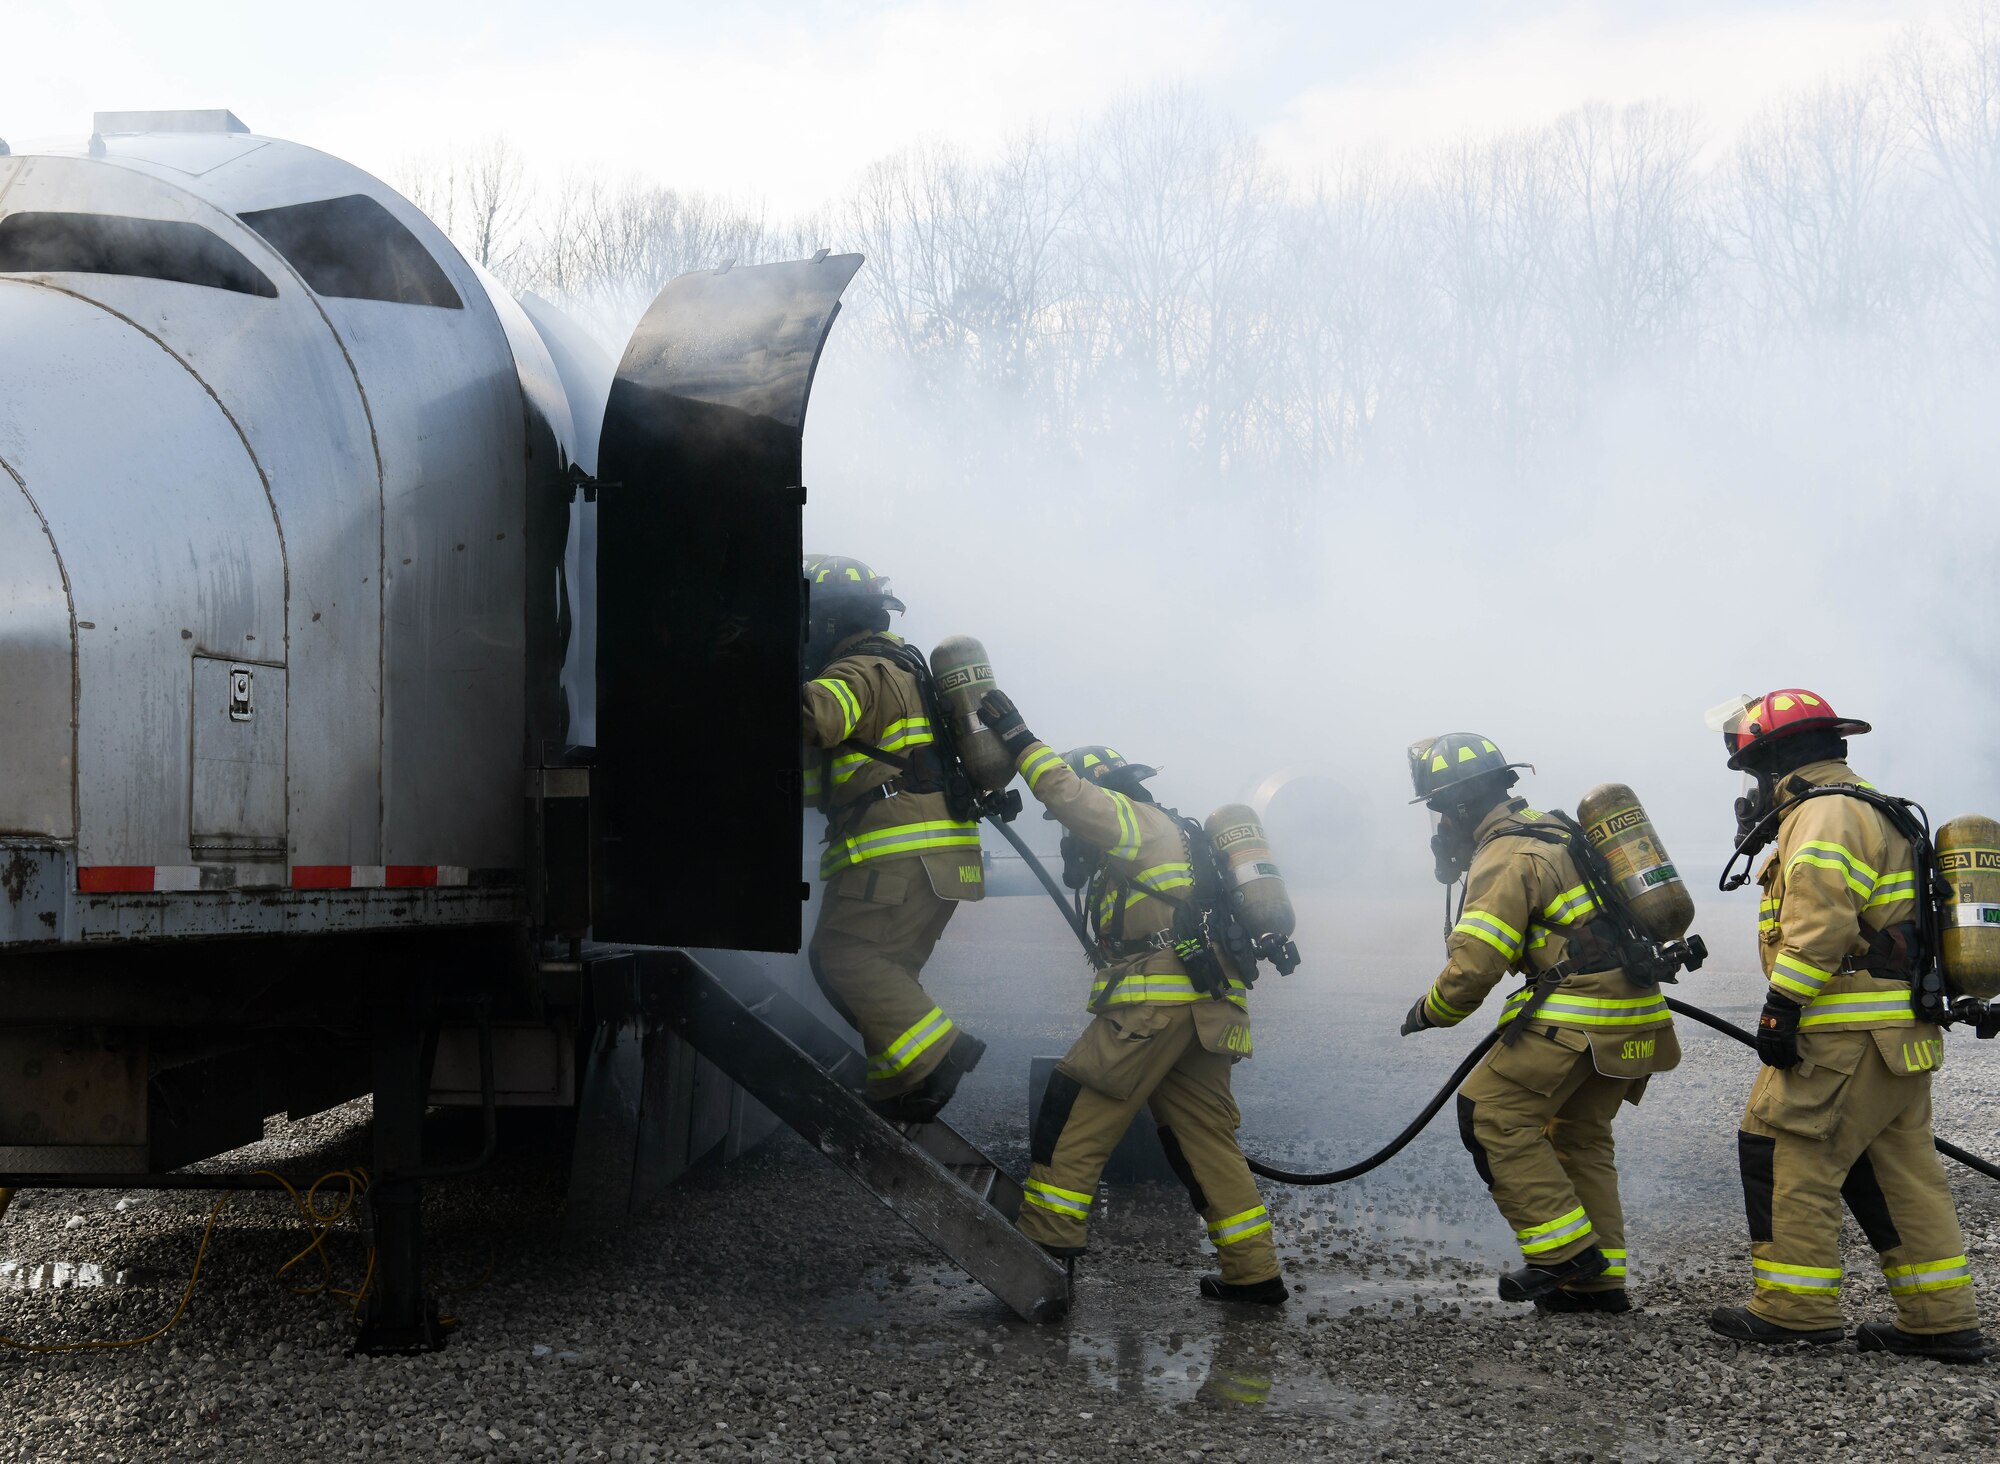 Arnold Air Force Base Fire and Emergency Services personnel enter a mock aircraft while training, Feb. 8, 2021, using a propane-fueled trainer brought to the base. Firefighters battled exterior fires before making entry where they faced additional fires and had to search for simulated victims. (U.S. Air Force photo by Jill Pickett)